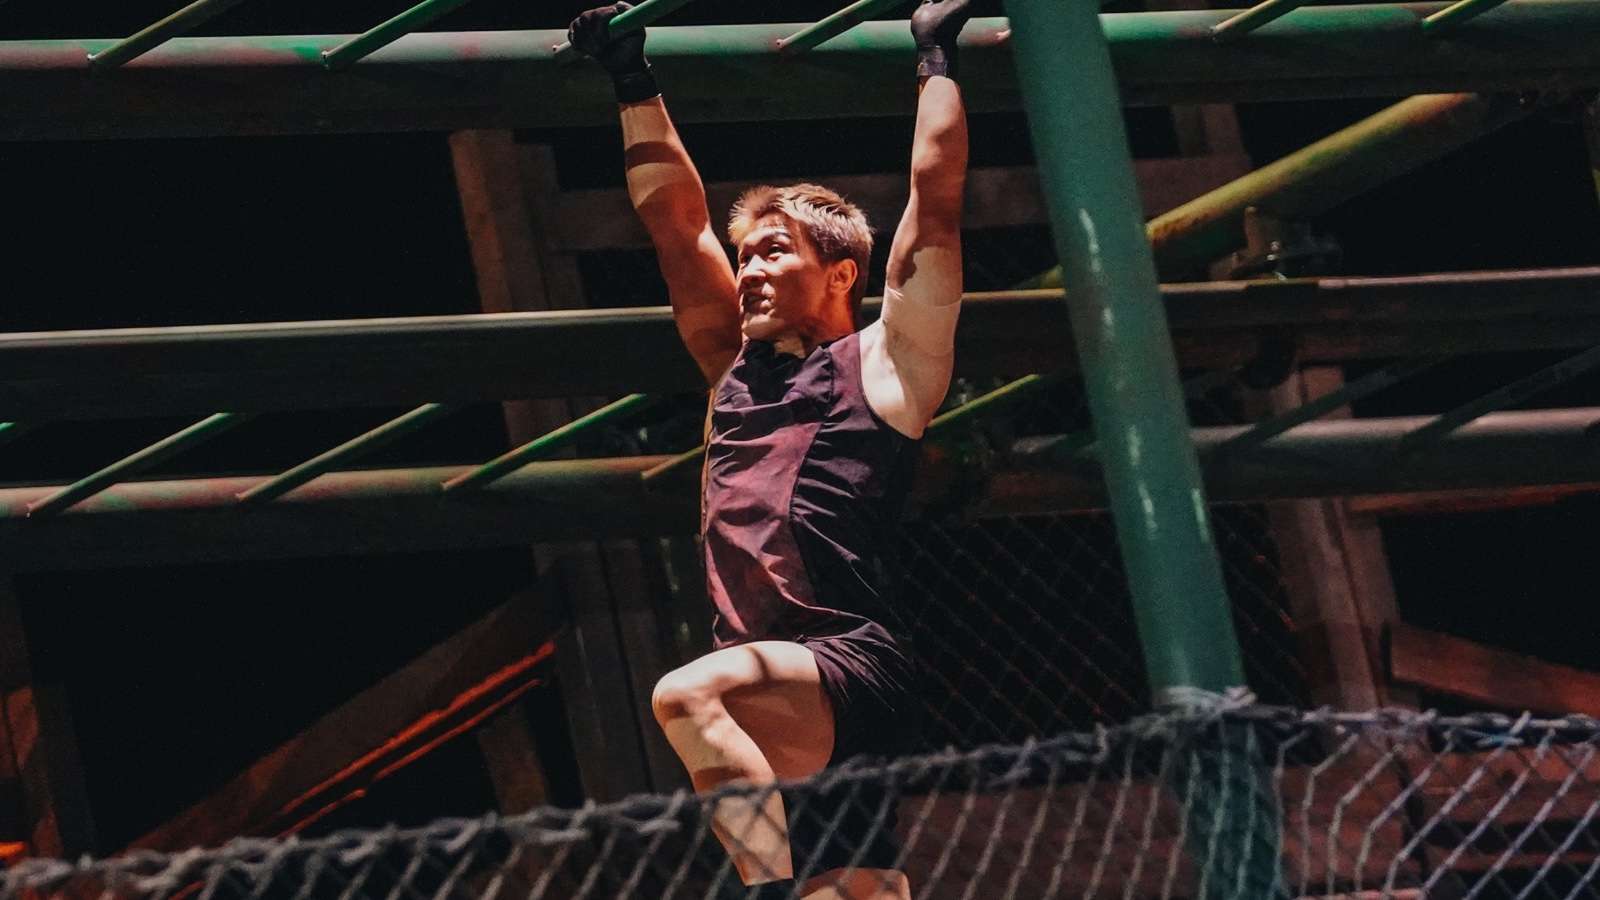 Physical 100 Season 2 contestant during a challenge.